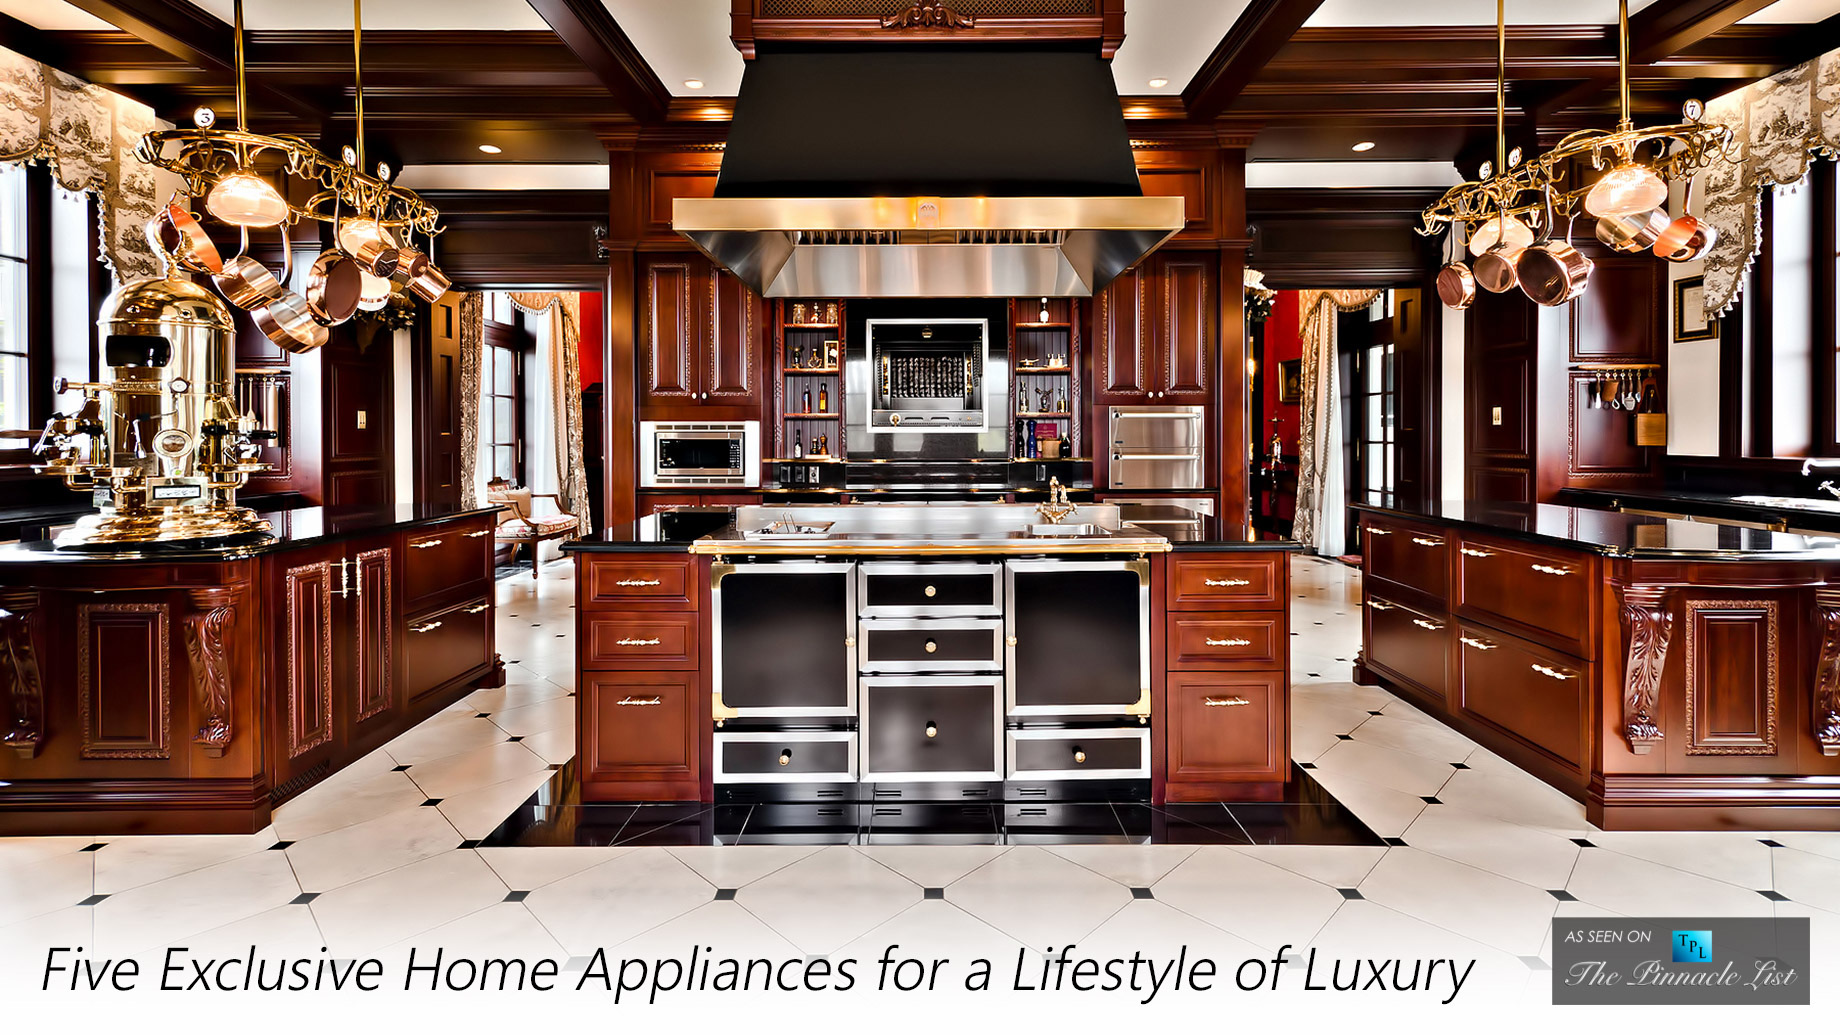 Five Exclusive Home Appliances for a Lifestyle of Luxury